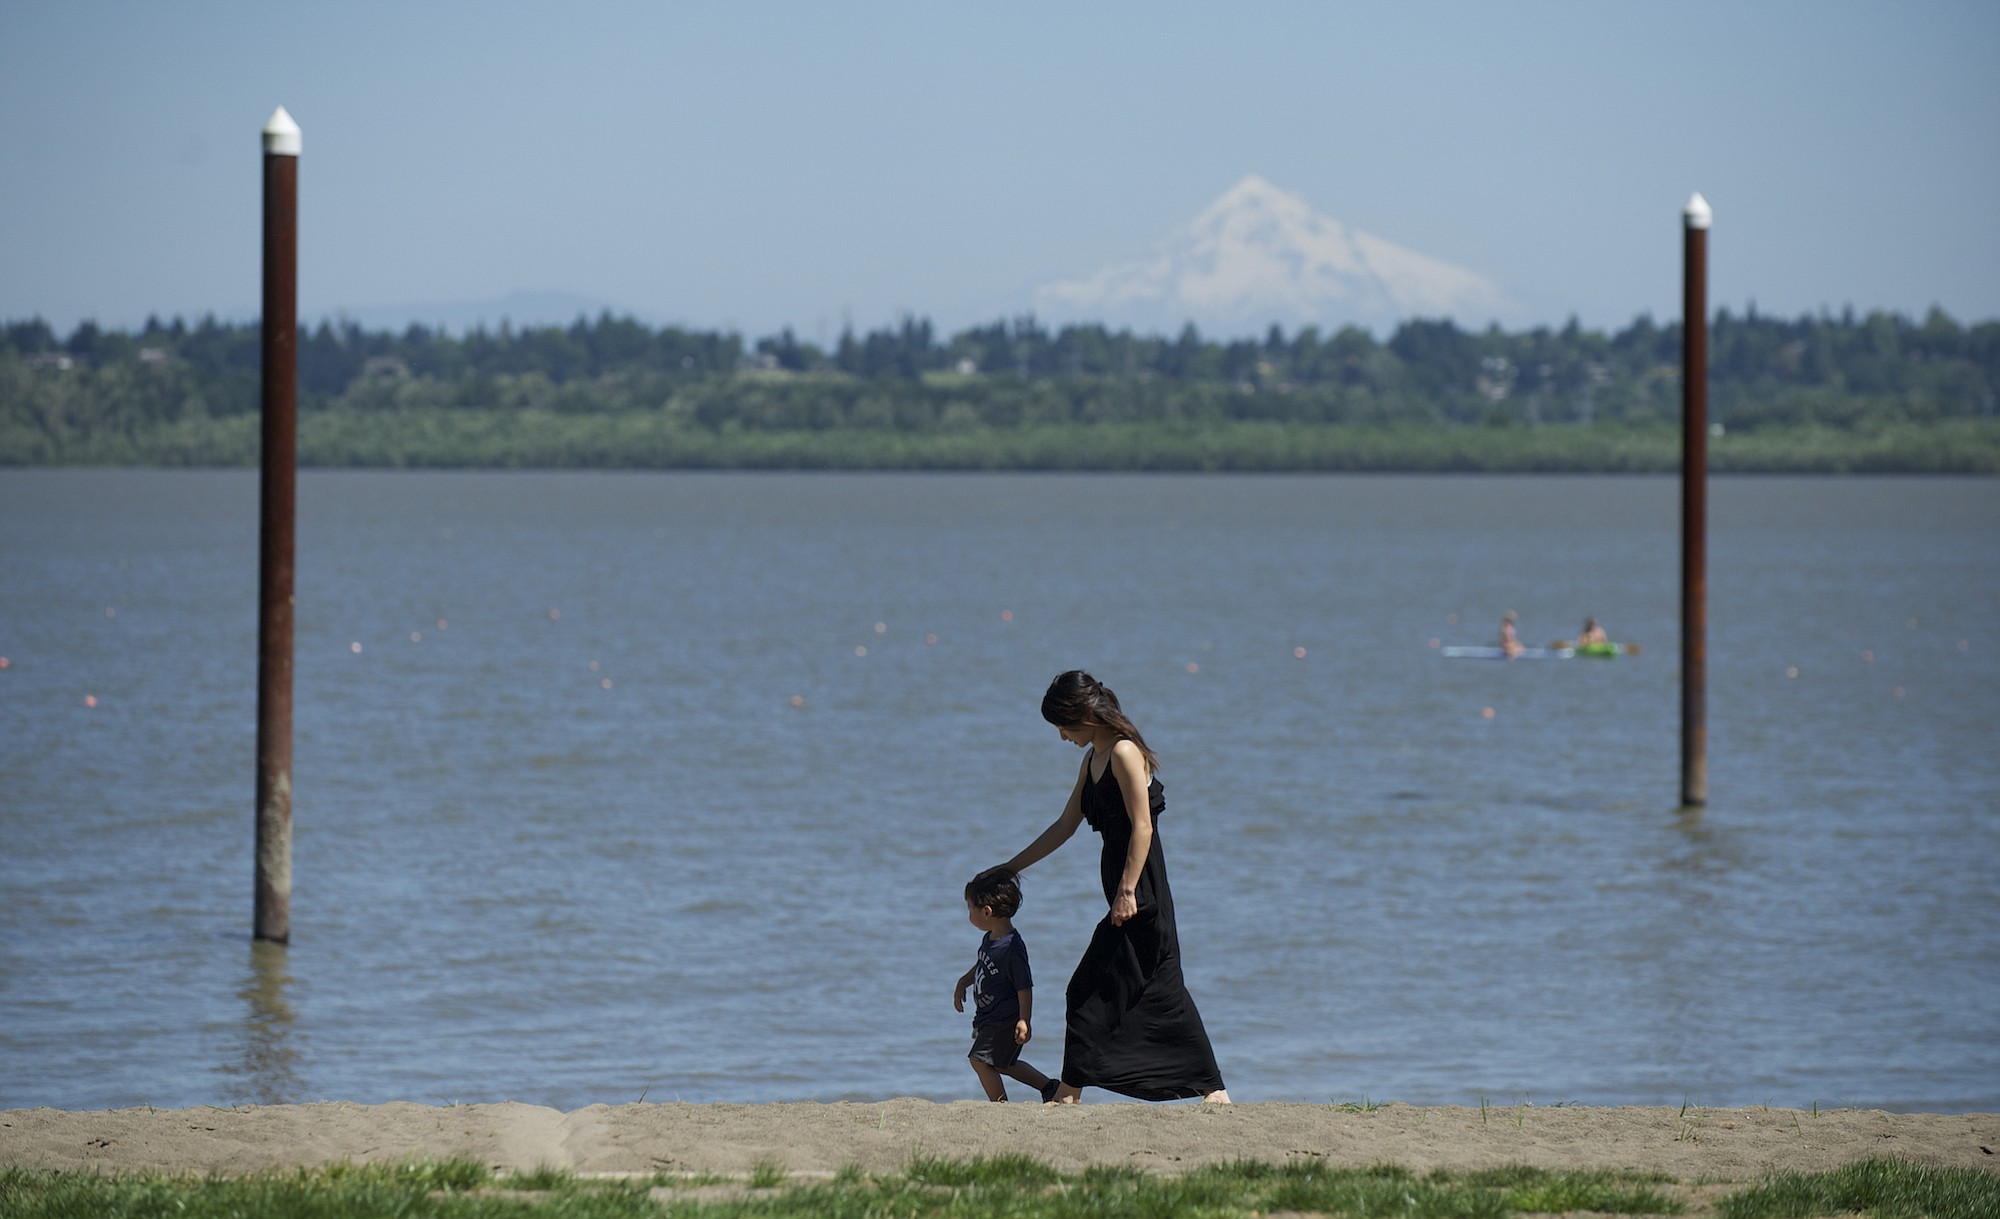 A Portland-based nonprofit is taking over the promotion and stewardship of Vancouver Lake, shown Monday, marking a transition for the local partnership that oversaw the lake for more than a decade.